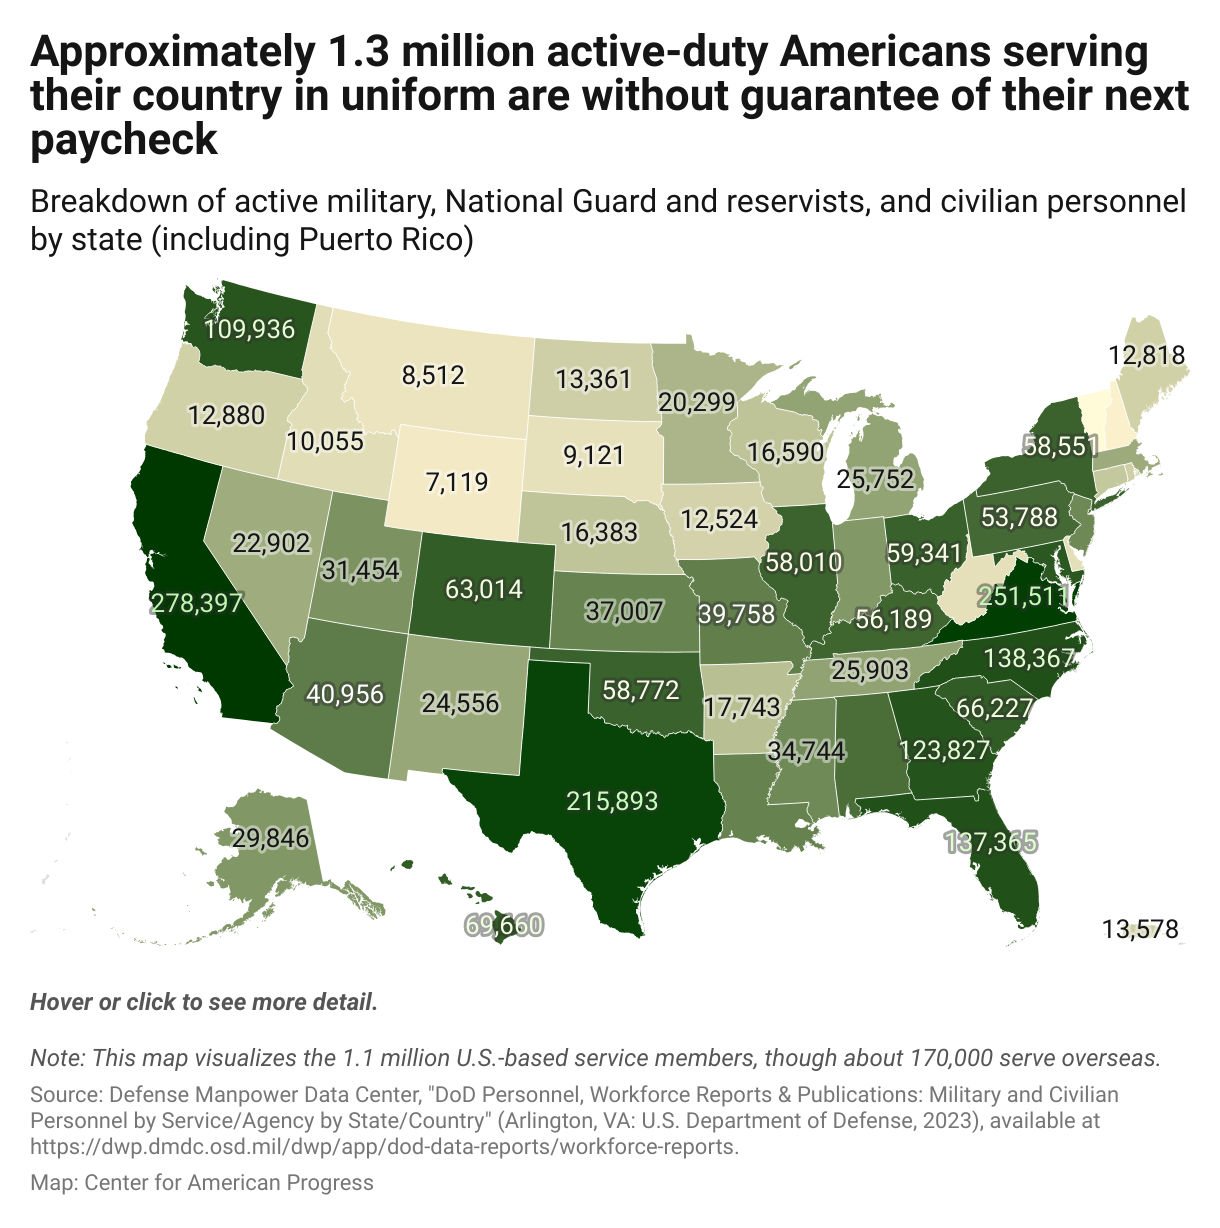 Map of active-duty military members, National Guard and reservists, and APF civilian personnel across the United States and Puerto Rico.